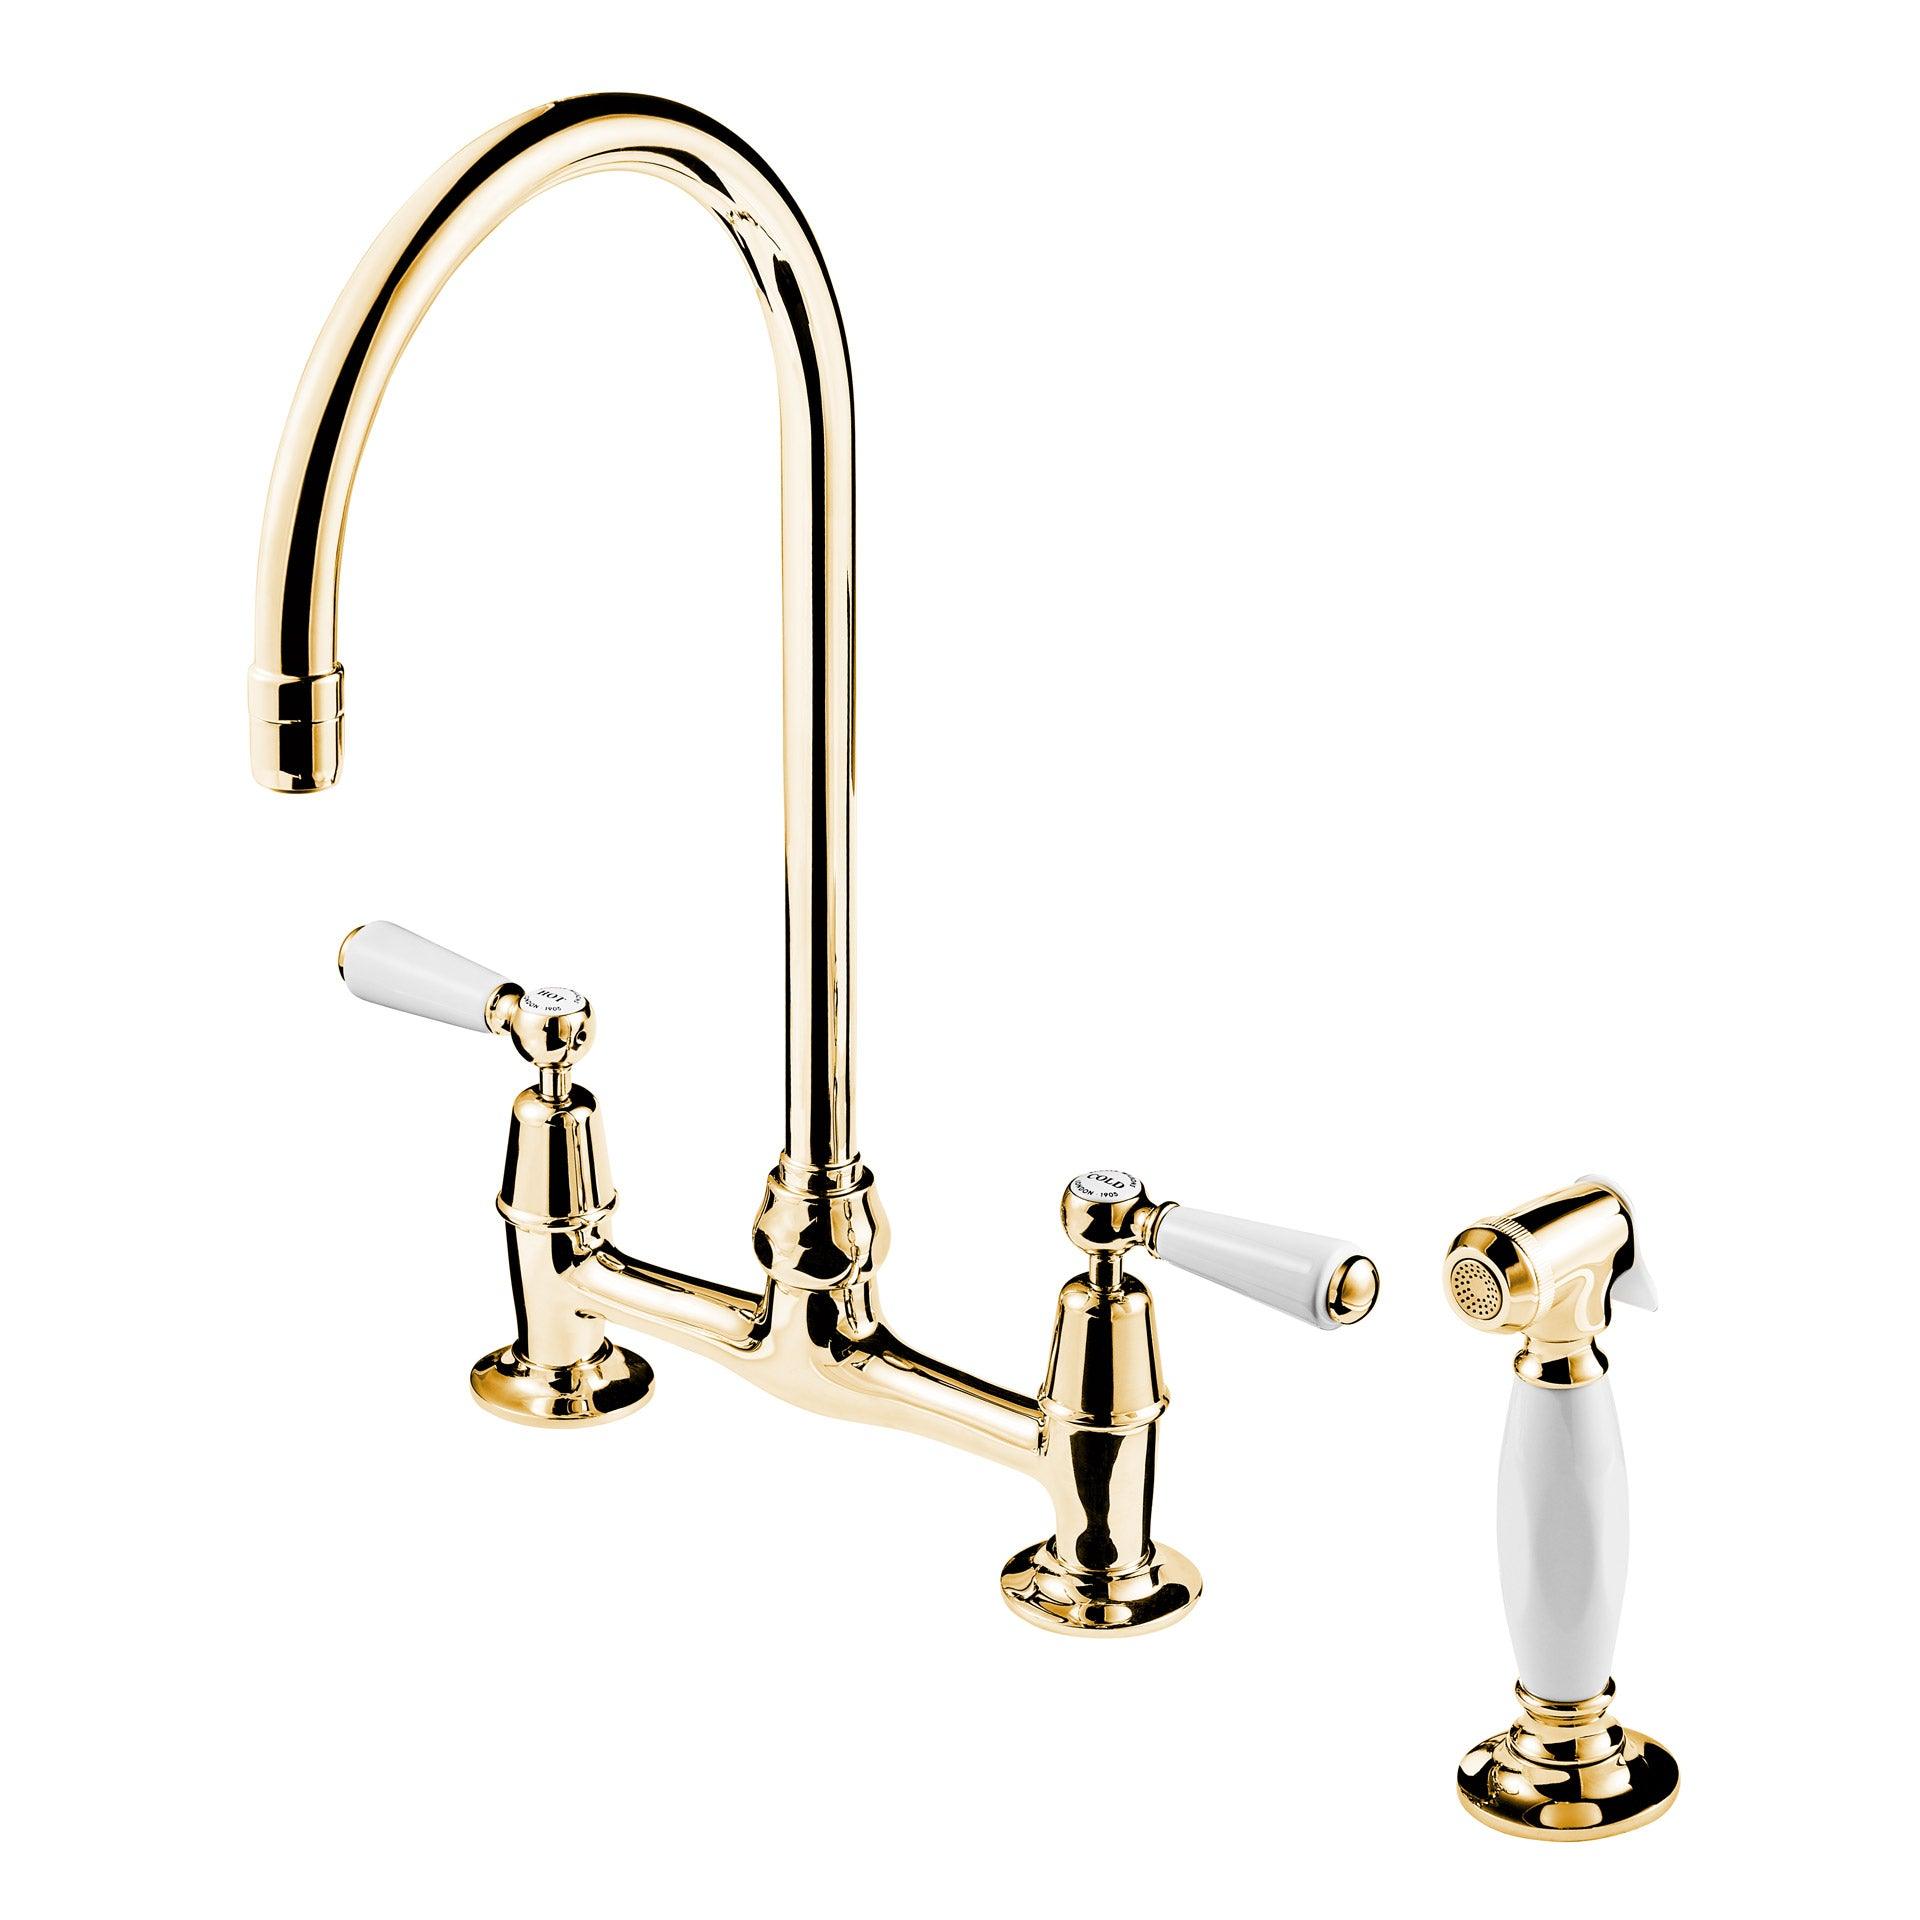 
  
  Barber Wilsons Regent 1890'S/1900'S 3 Hole Bridge Faucet 8" Swan Neck Swivel Spout with Hand Spray (Ceramic Disc) and White Porcelain Lever and Buttons and Spray - 16 Luxury Finishes
  
